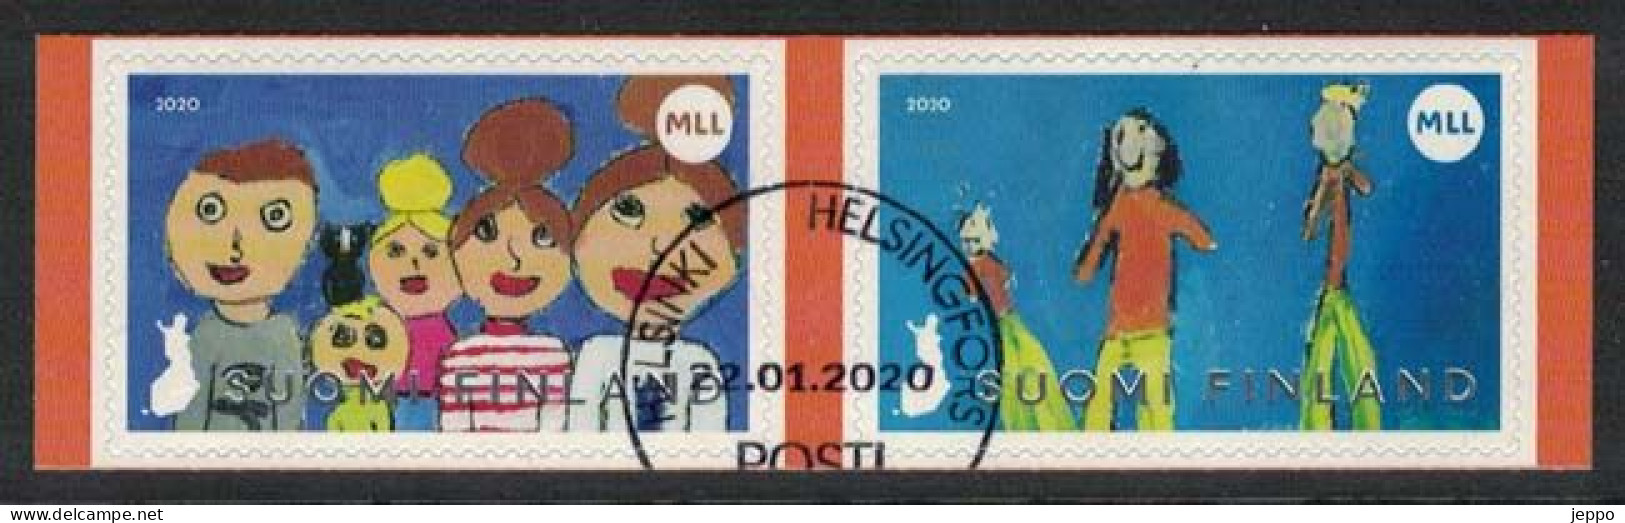 2020 Finland, Mannerheim League For Child 100 Years, Fine Used Pair. - Used Stamps